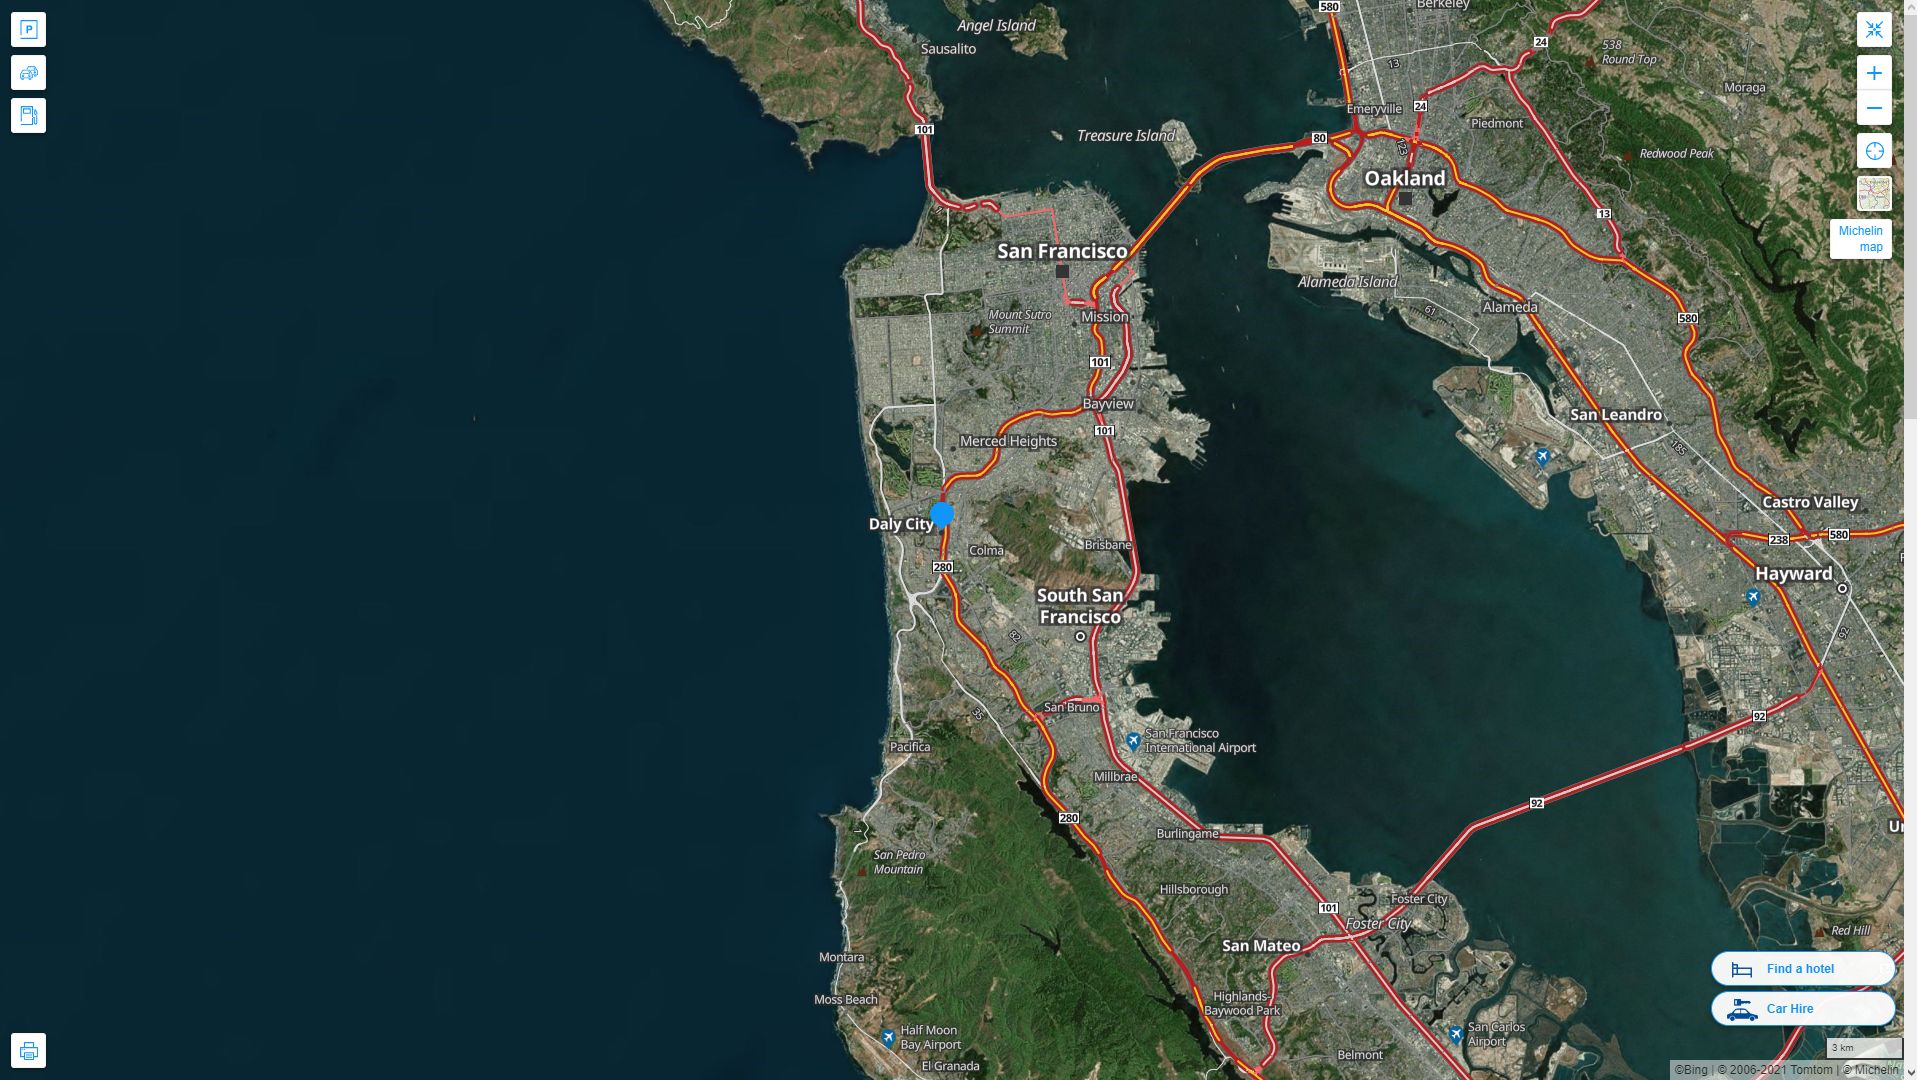 Daly City California Highway and Road Map with Satellite View